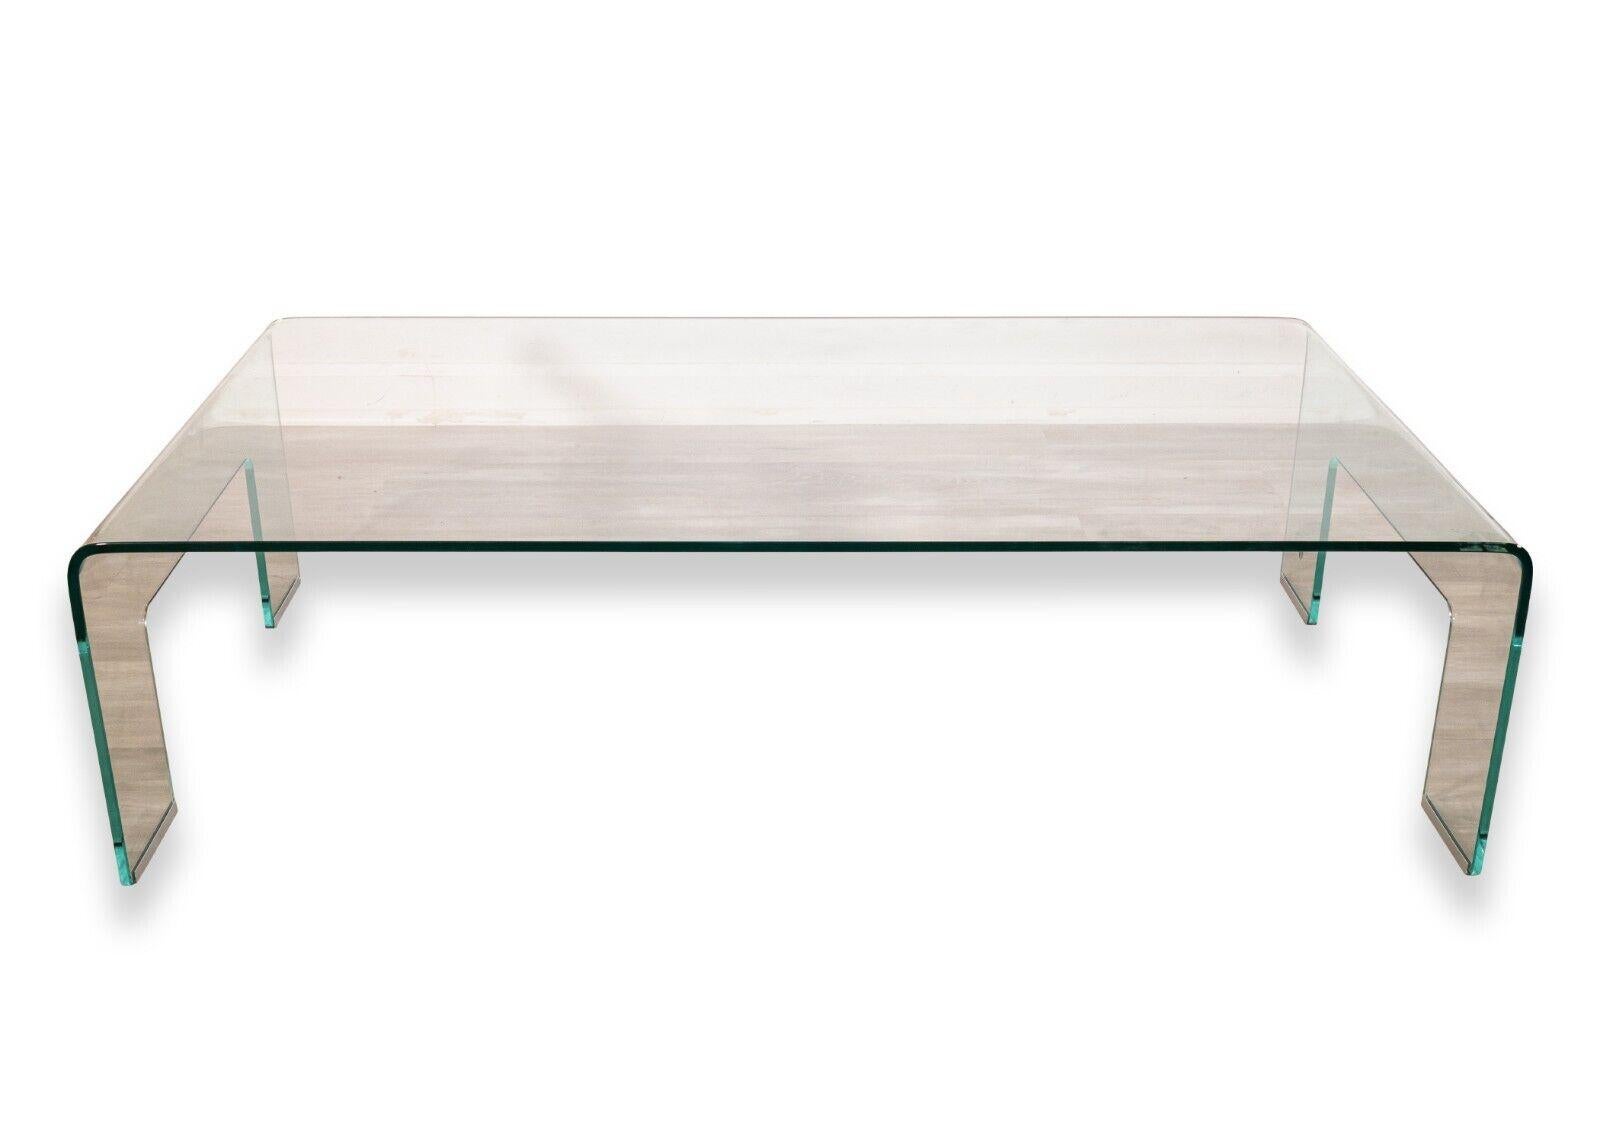 A contemporary modern Italian Calligaris rectangular glass waterfall coffee table. A stunning small coffee table from Italian furniture designer Calligaris featuring an all glass waterfall design, with metal leg covers, and a Calligaris tagging on